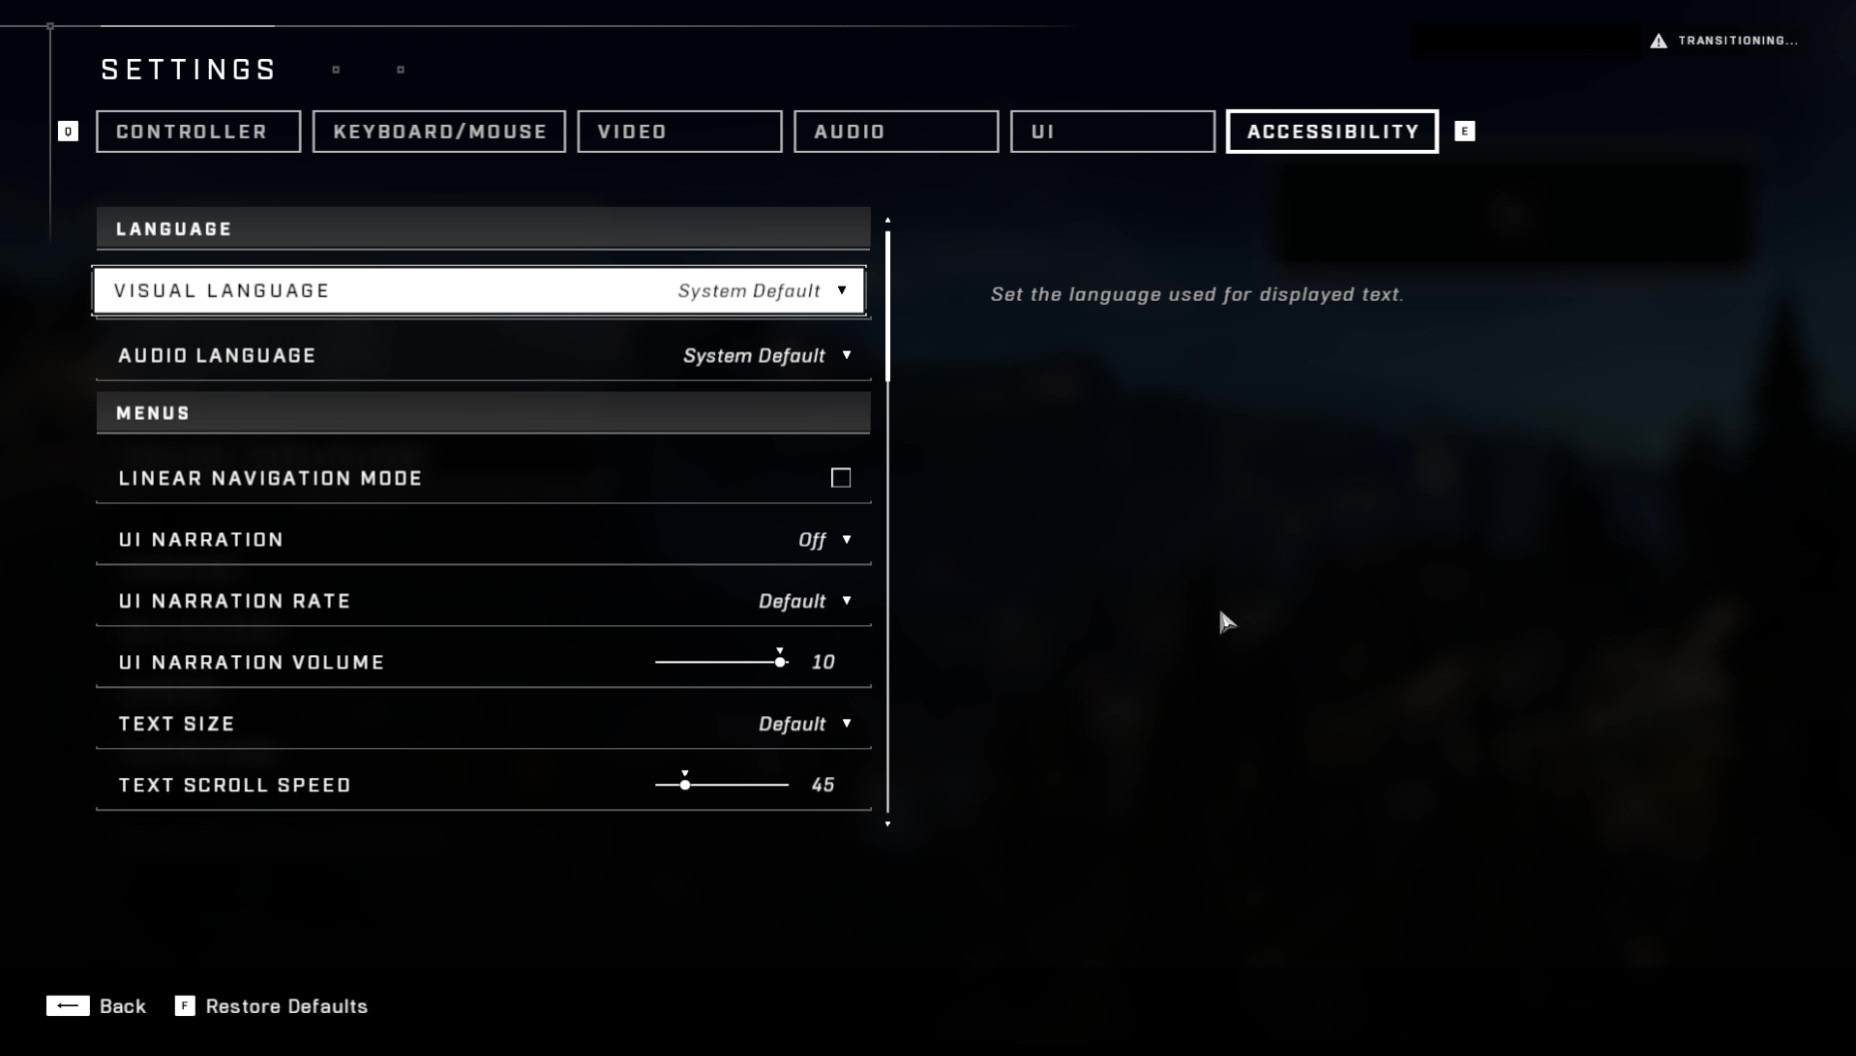 Screenshot of startup screen of Halo Infinite game SETTINGS with VISUAL LANGUAGE set to System Default. 